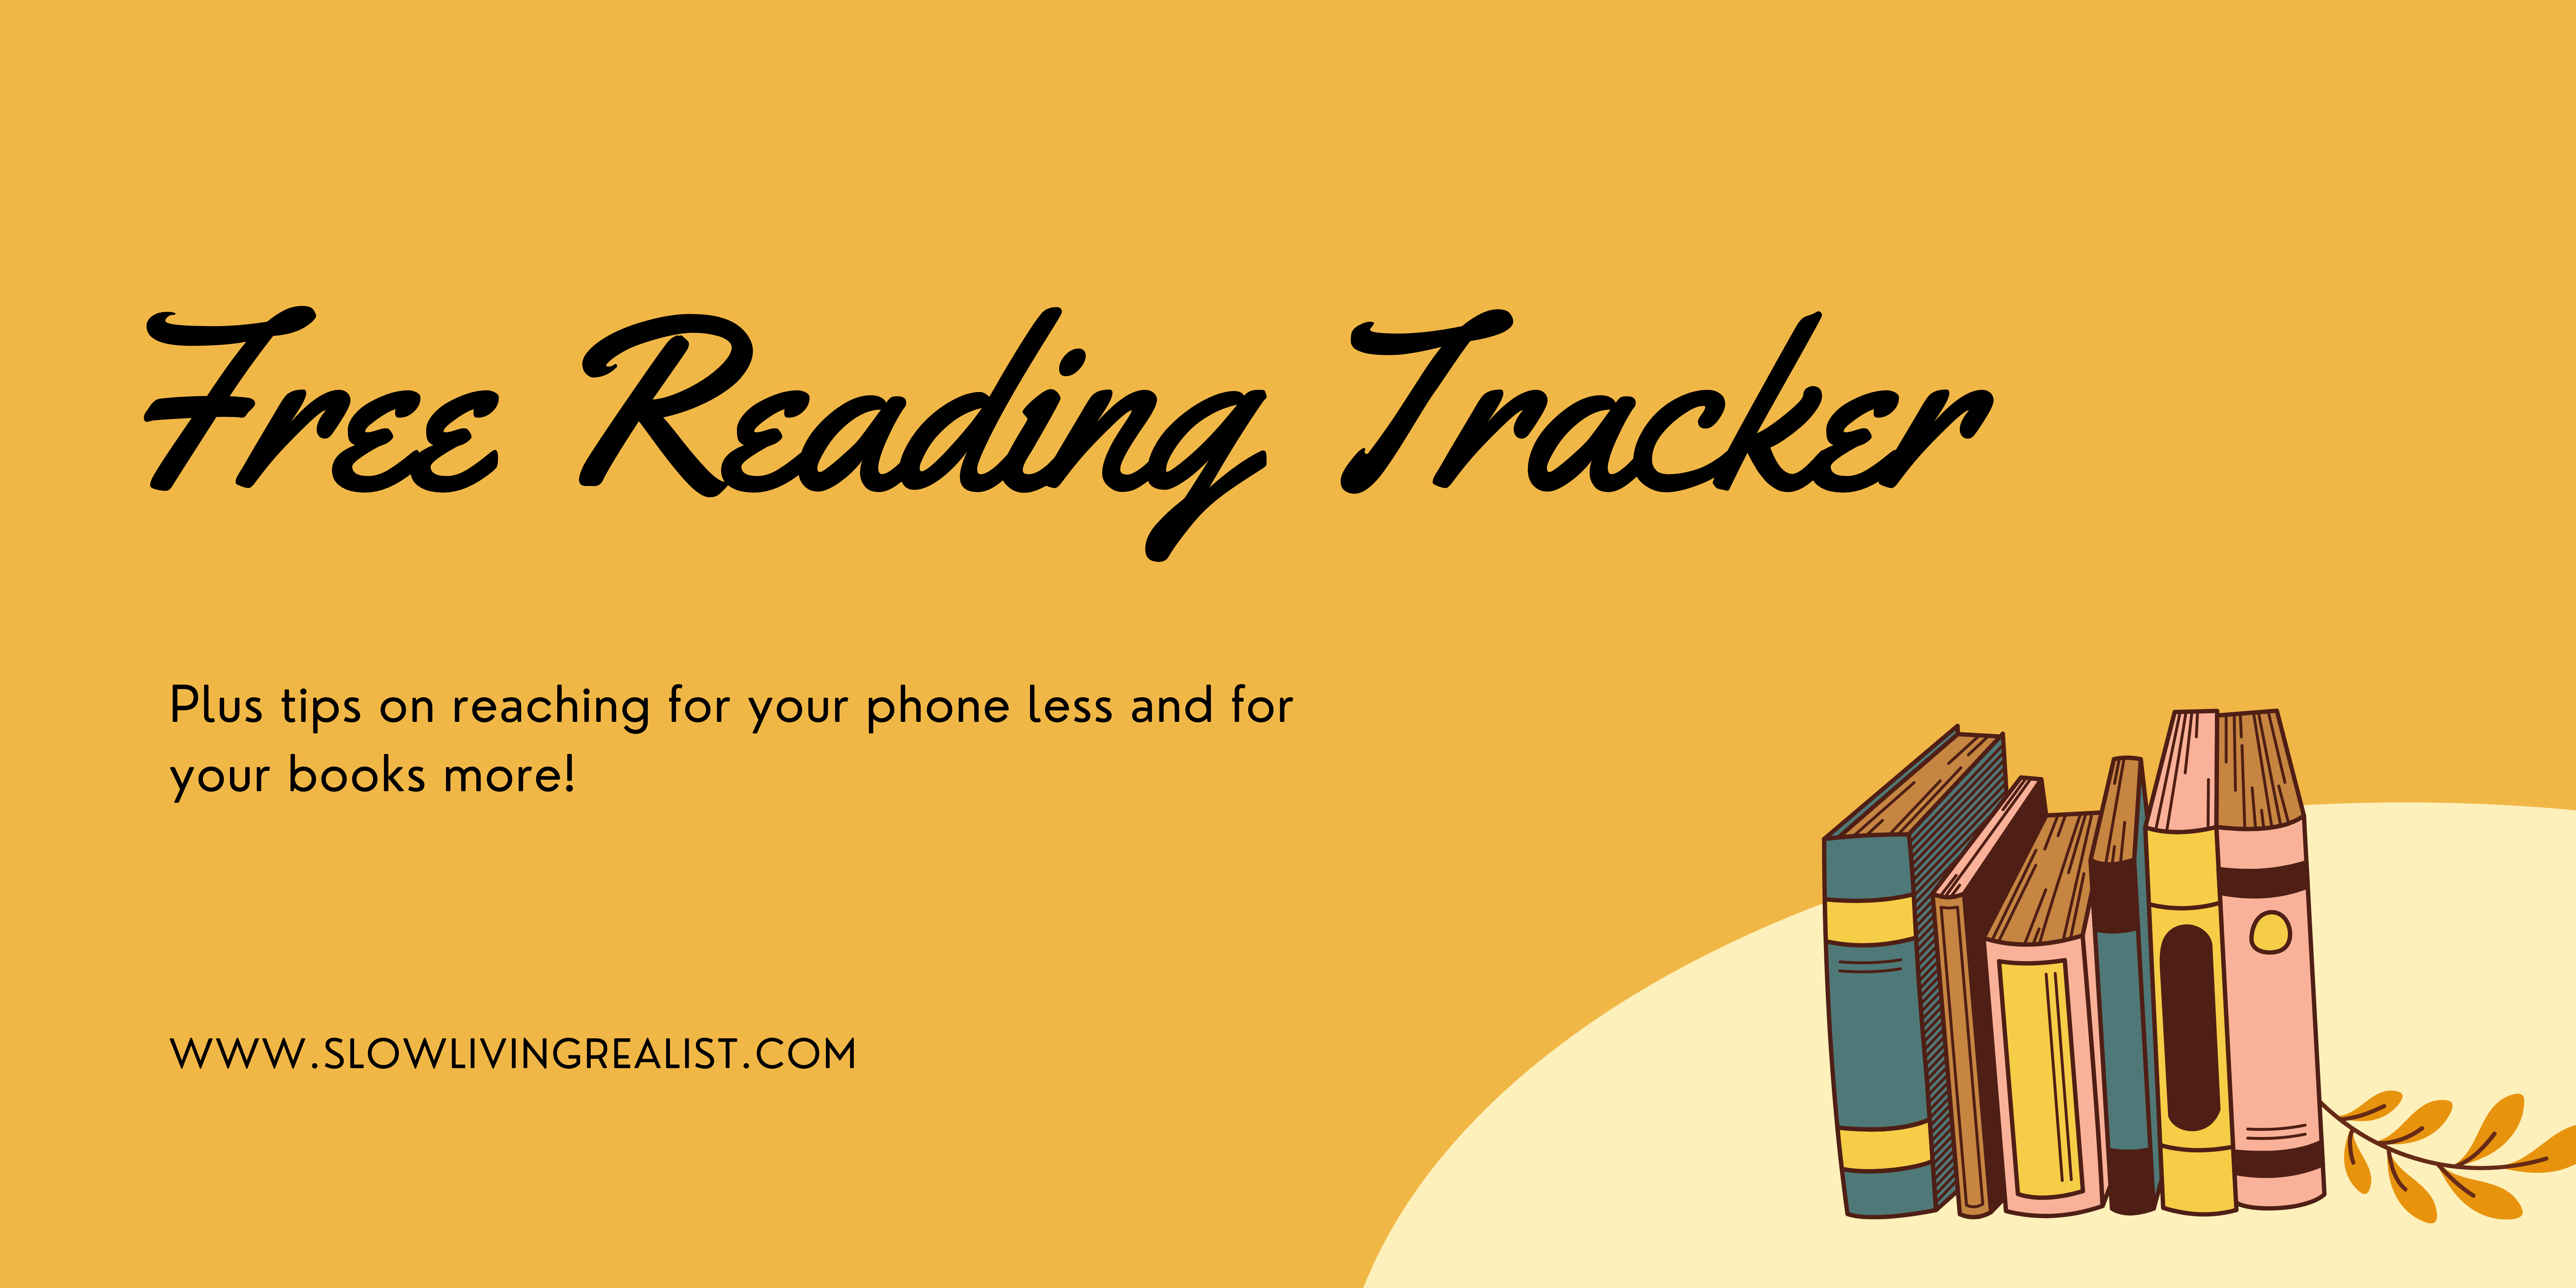 Free Reading Tracker (Plus tips on reaching for your phone less and for your books more)!